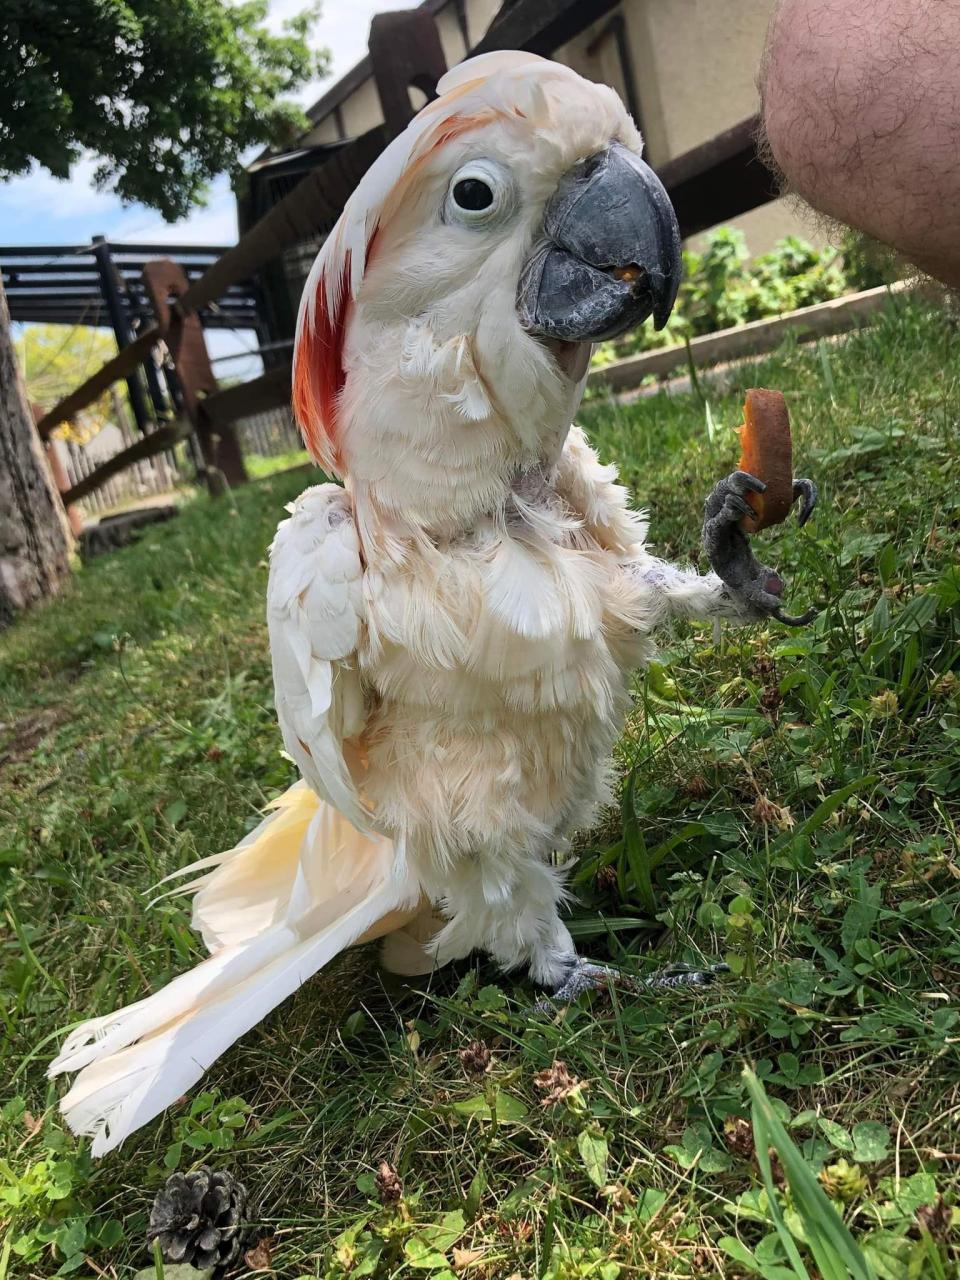 Polly, a Moluccan cockatoo who lived at the Utica Zoo for 53 years, died in early January. He was estimated to be 70 to 80 years old, making him the zoo's oldest and longest-term resident.